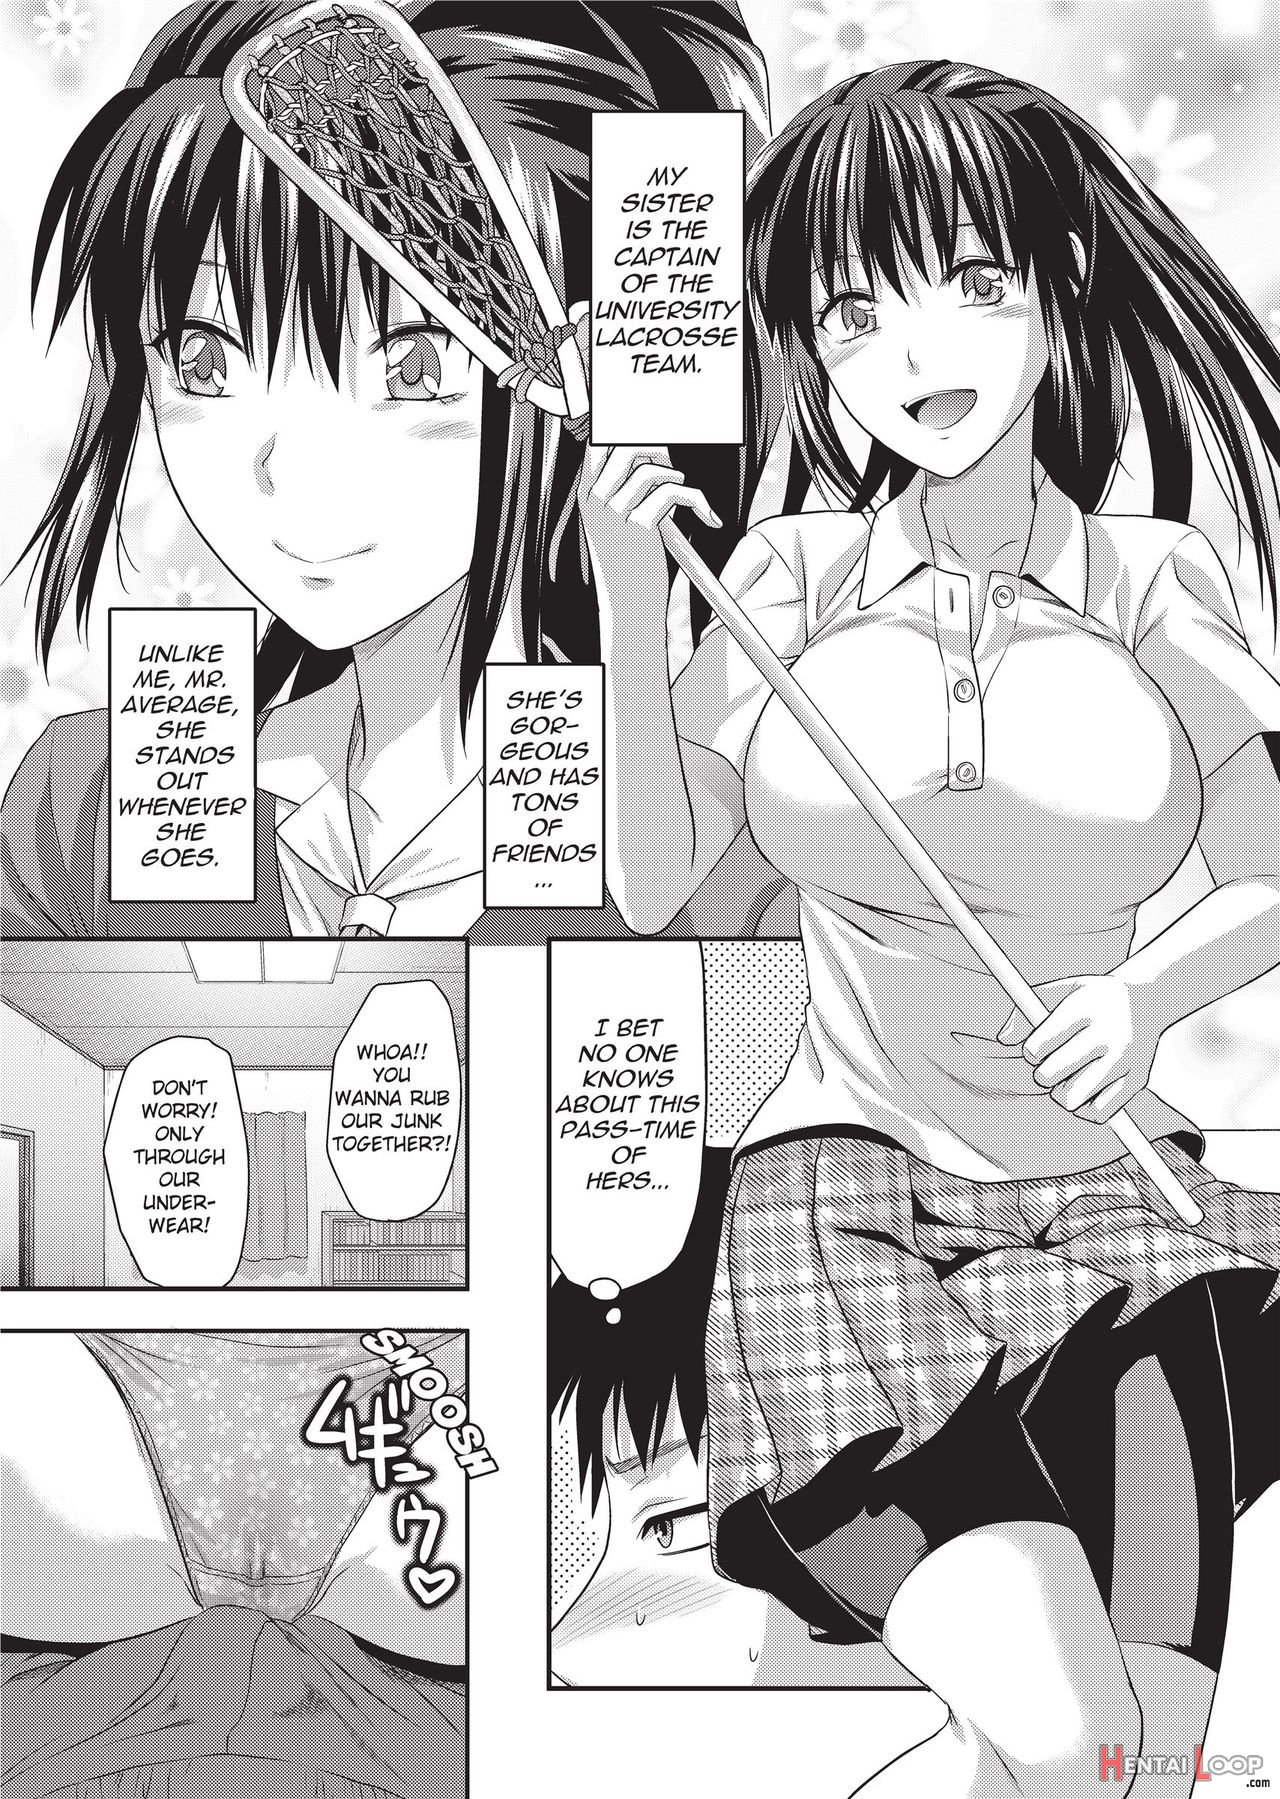 One Kore - Sweet Sister Selection page 10